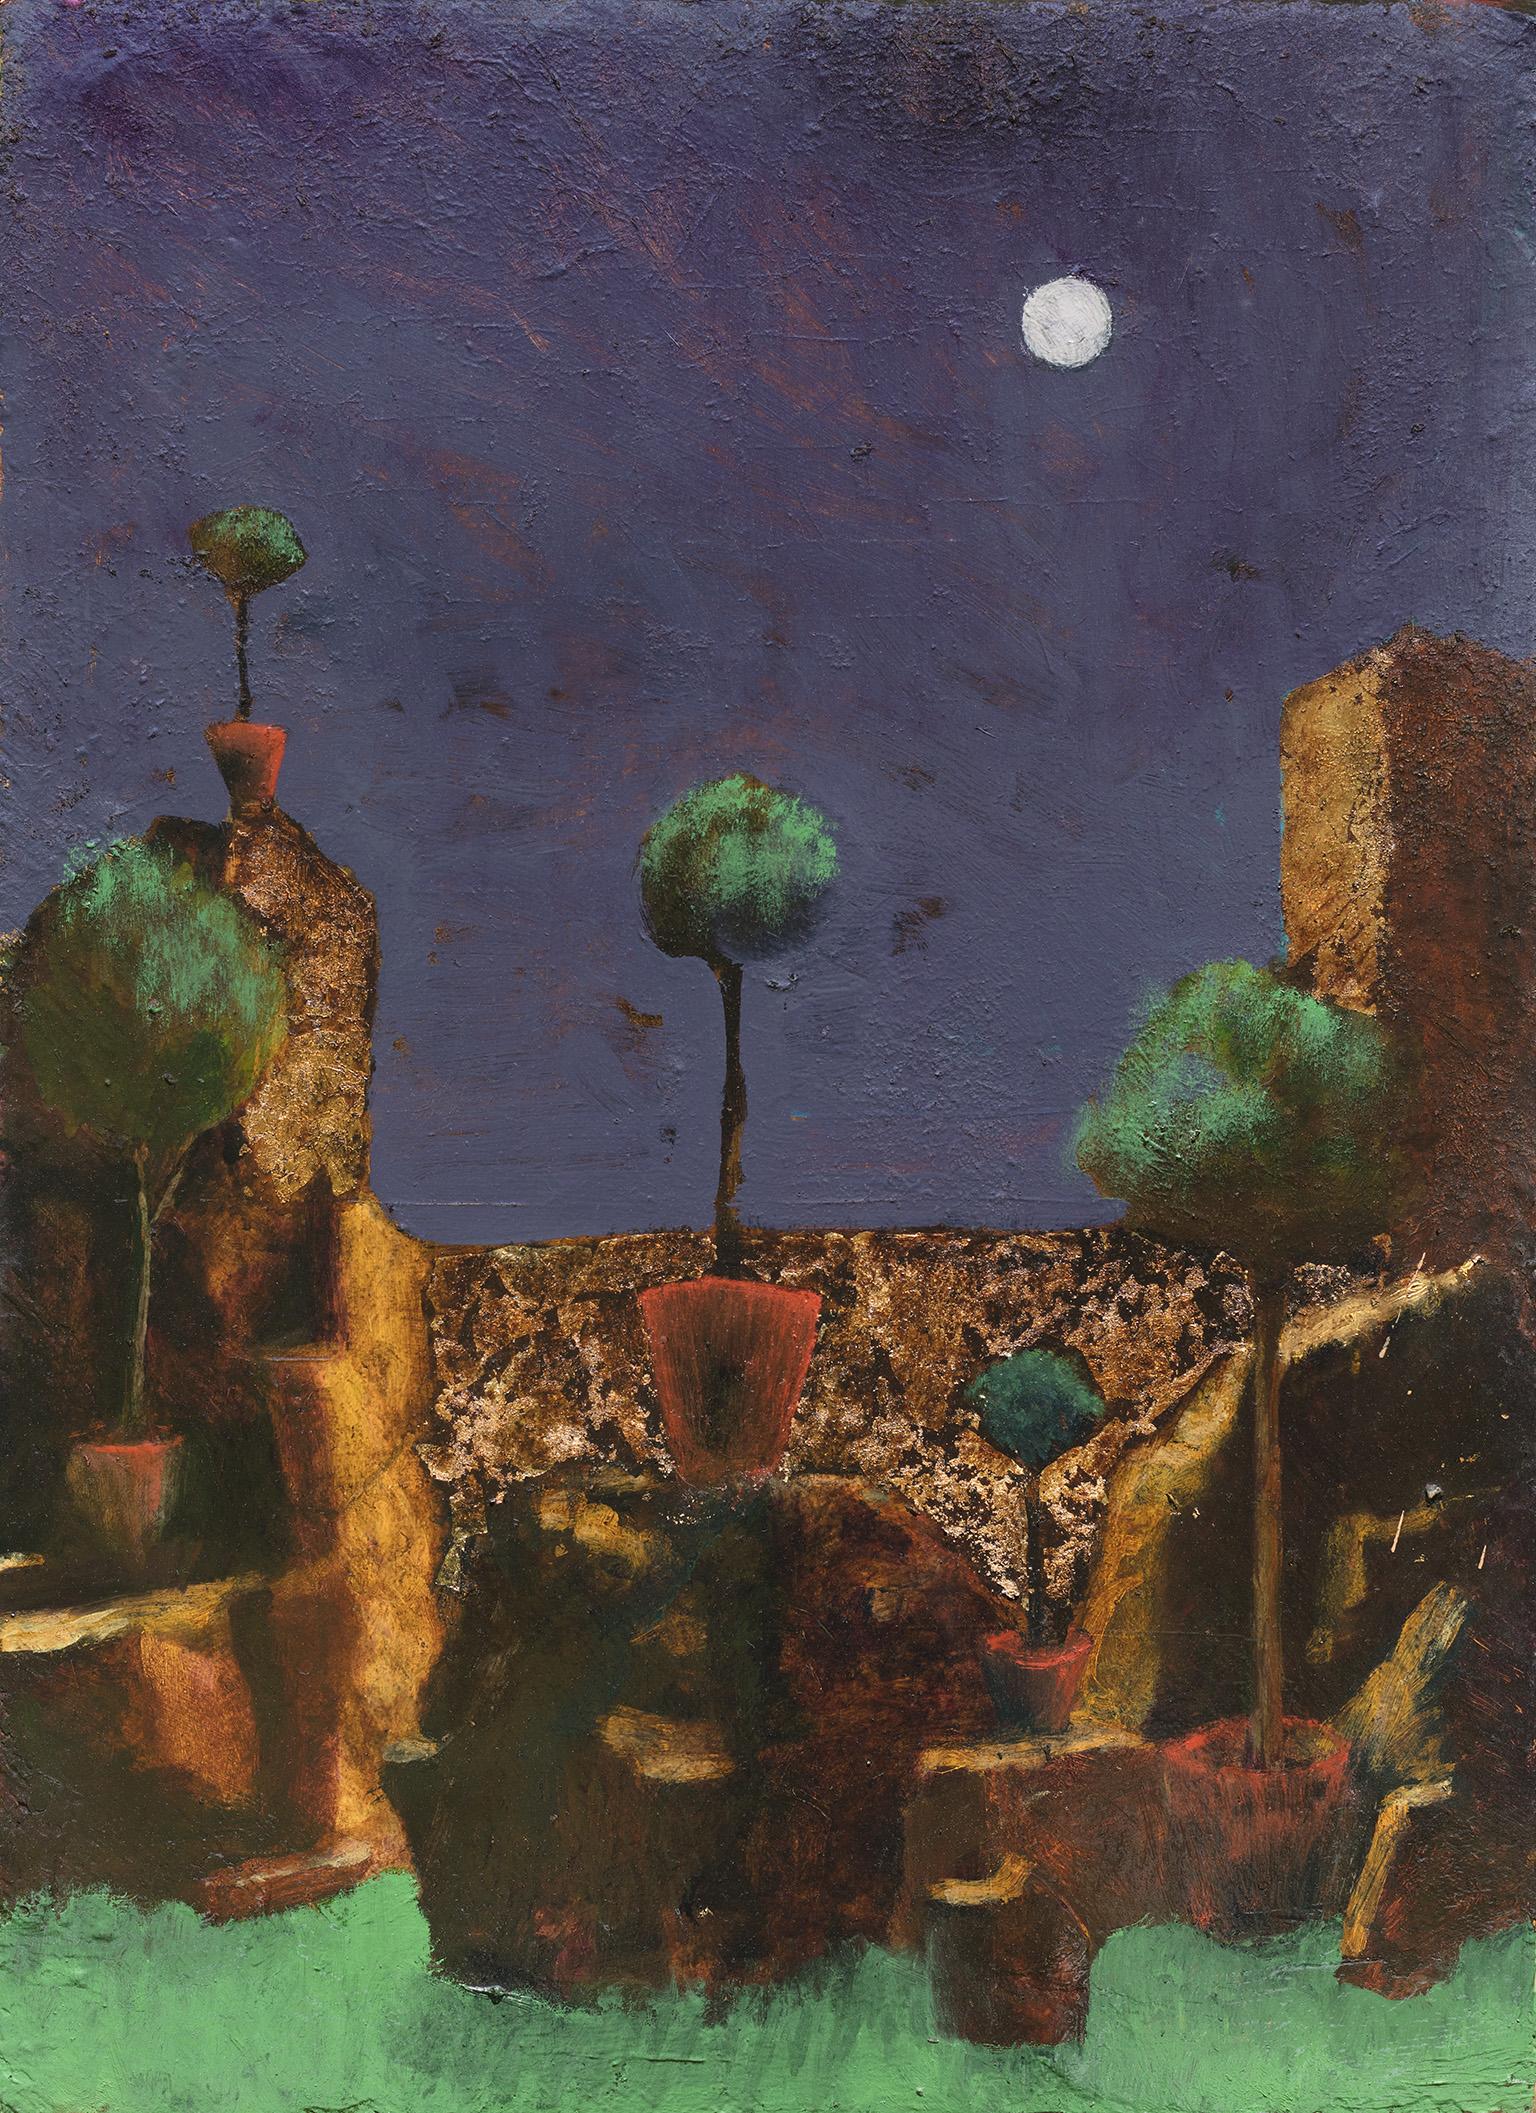 Gregory Kitterle's "Garden at Night" is a 27.5 x 20 inch figurative painting on panel. The scene represent a very poetic and dreamy garden lit by the moon. The use of gold leaf increases the feeling of the rocks glowing under the moon light, while